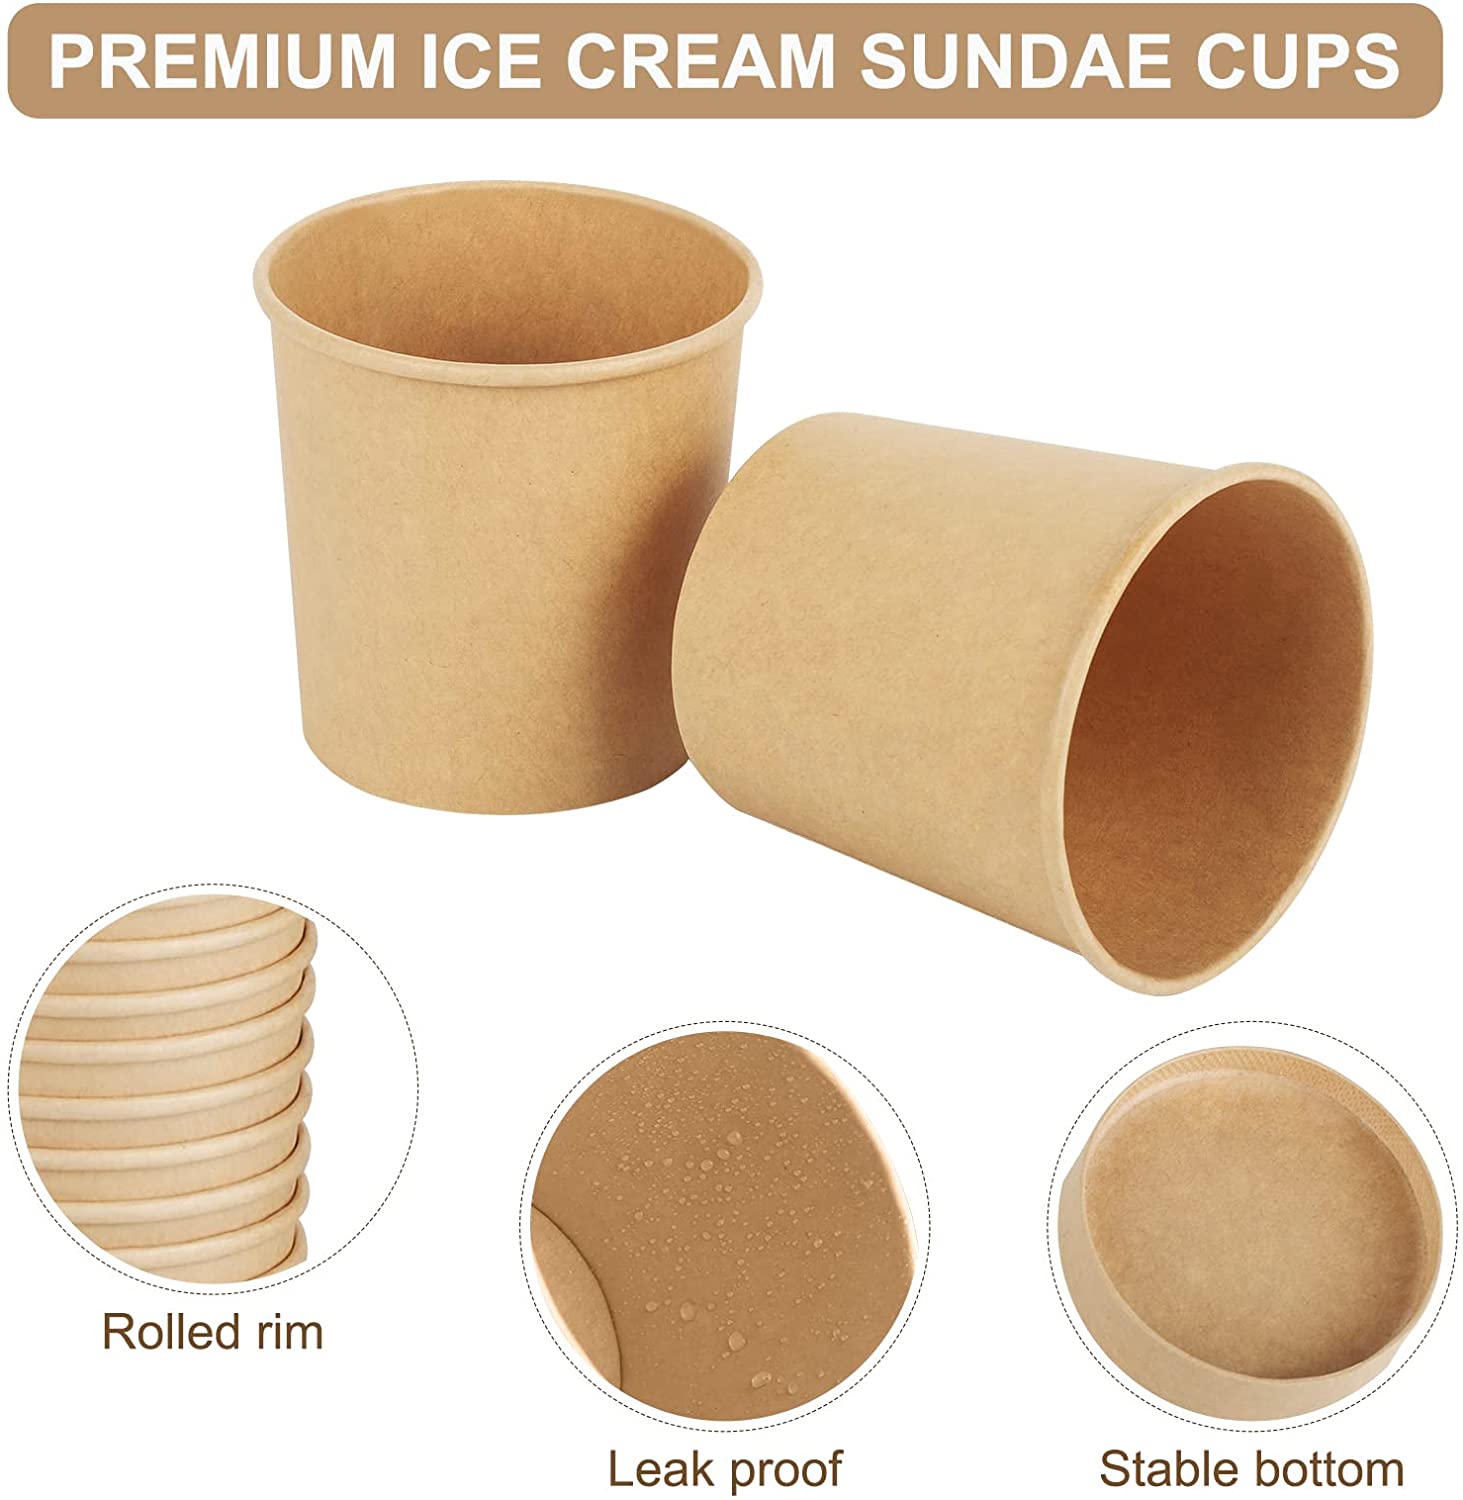 https://www.tuobopackages.com/degradable-ice-cream-cup/